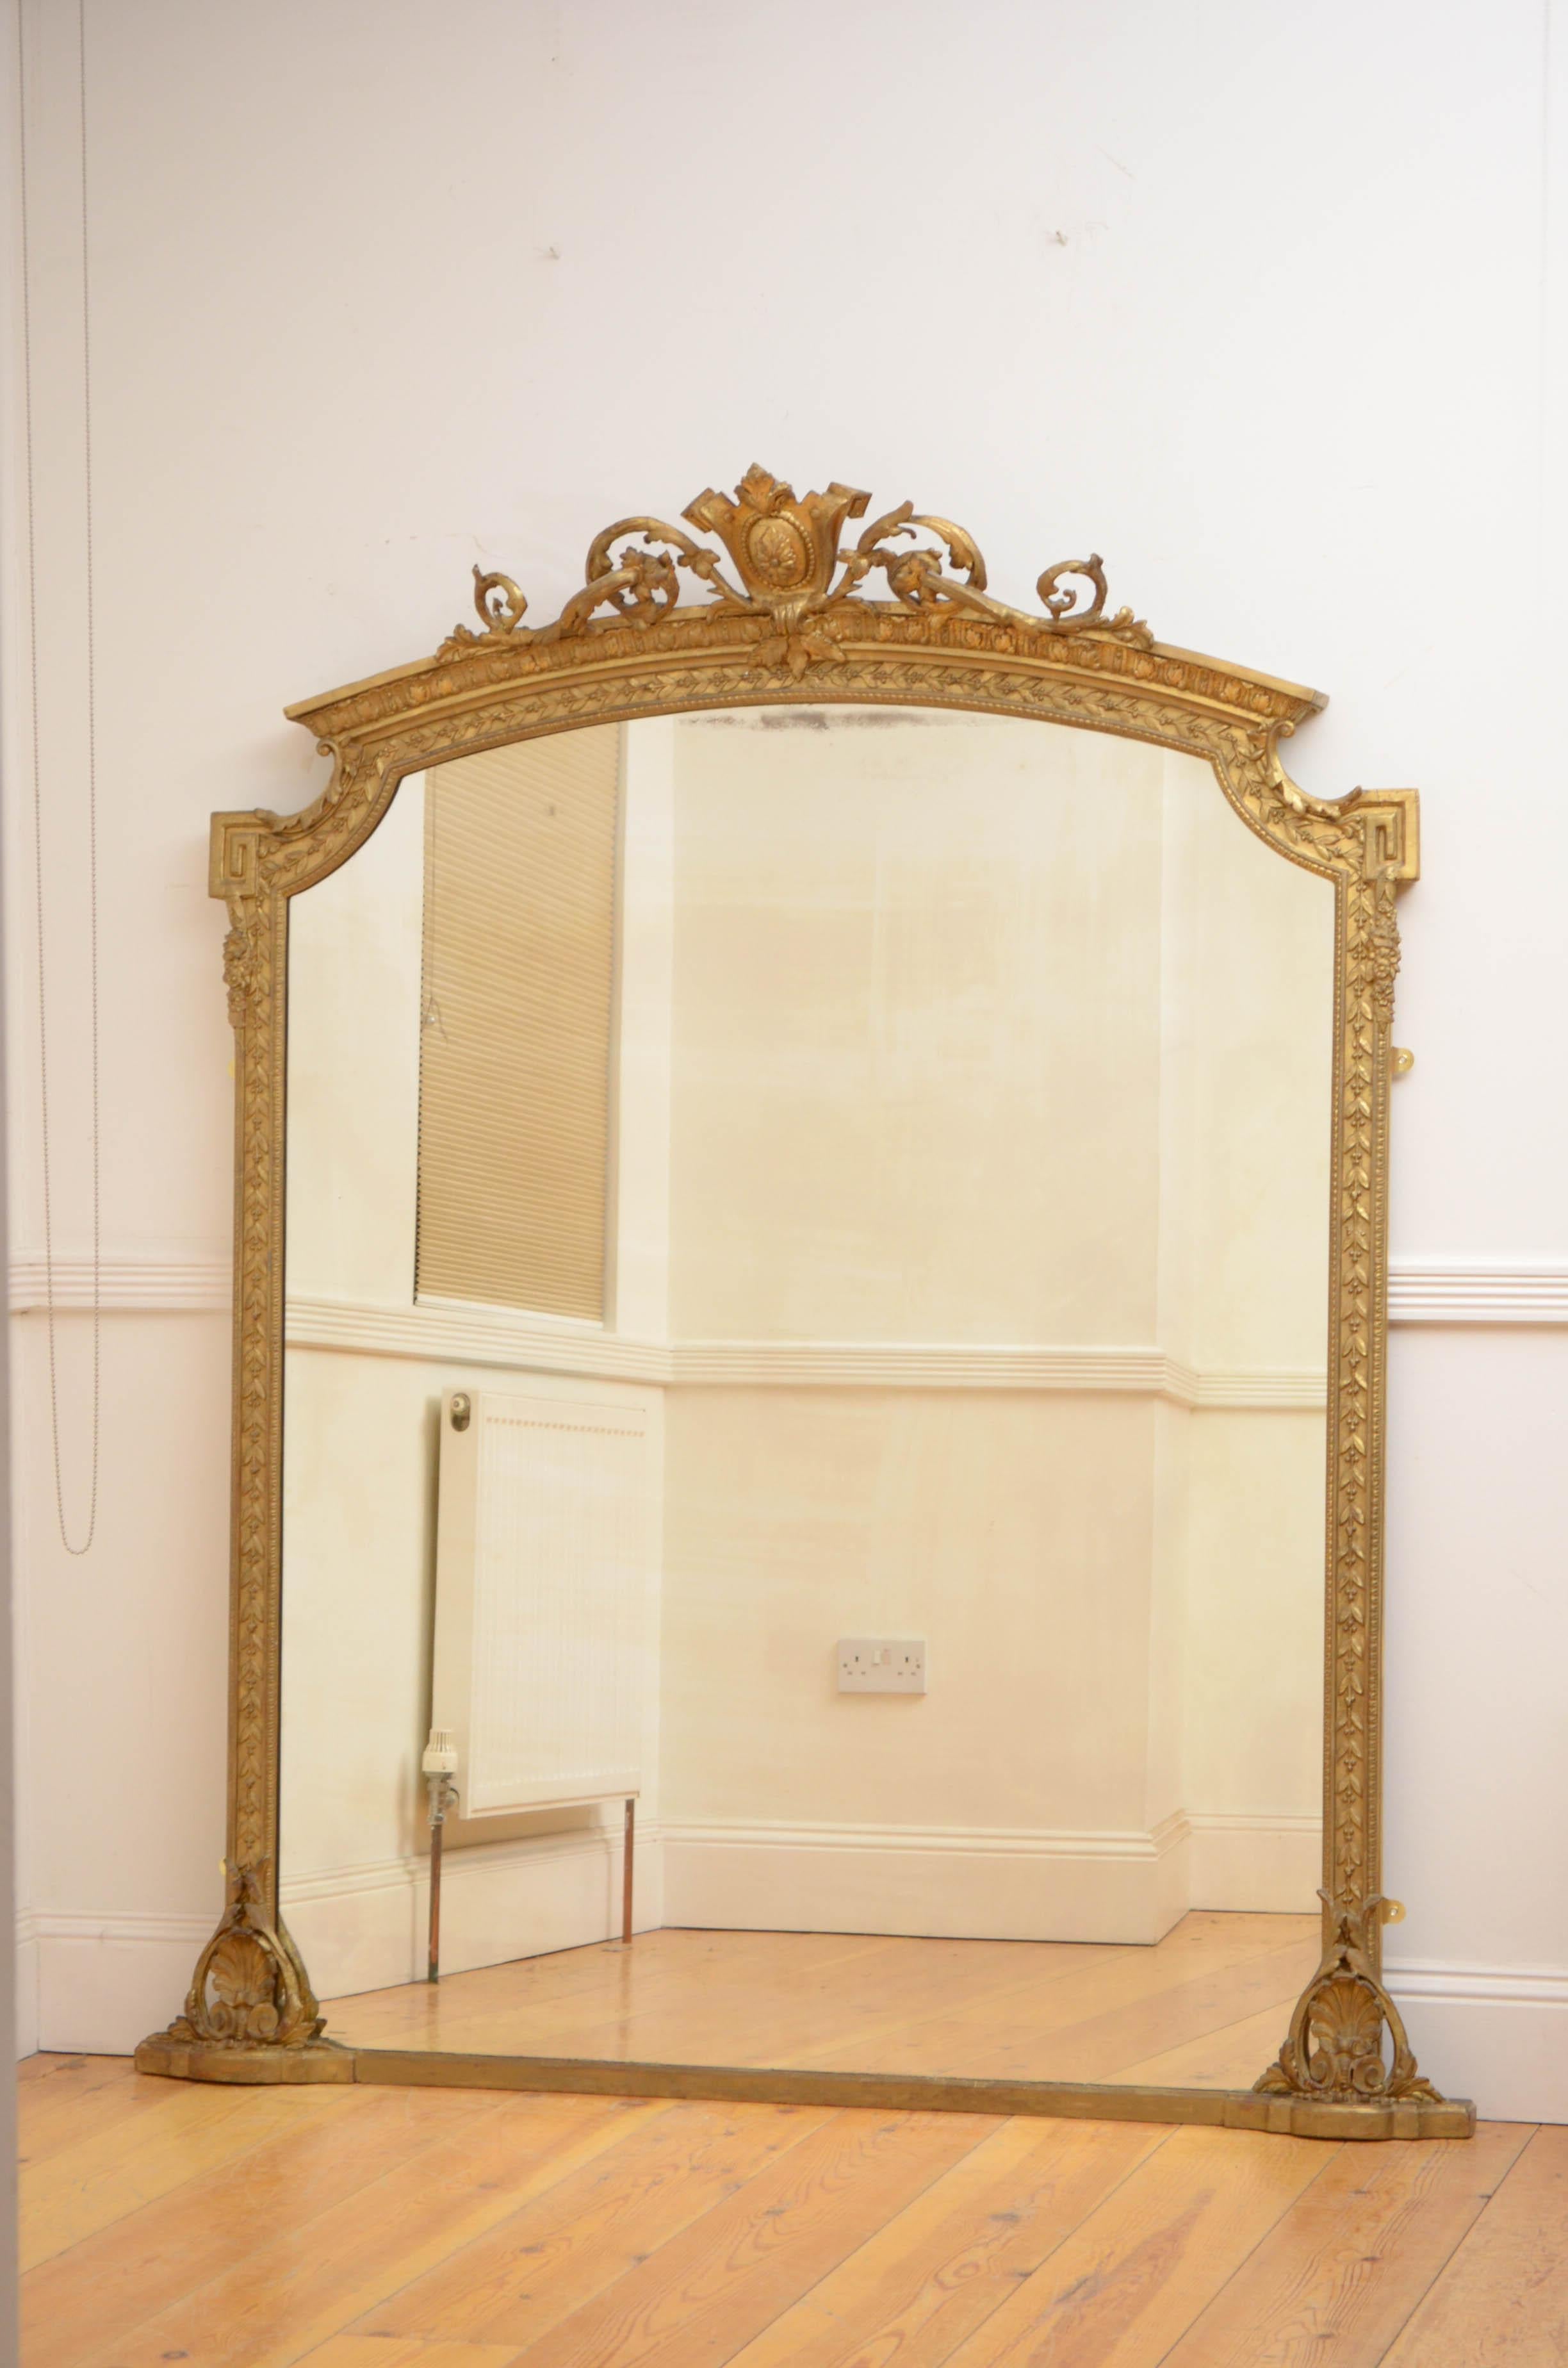 Sn5164 Superb early Victorian gilded wall mirror, having original glass with some foxing and imprecations in laurel decorated giltwood frame with shell scrolls to the base and foliage crest. This antique mirror retains its original glass, original